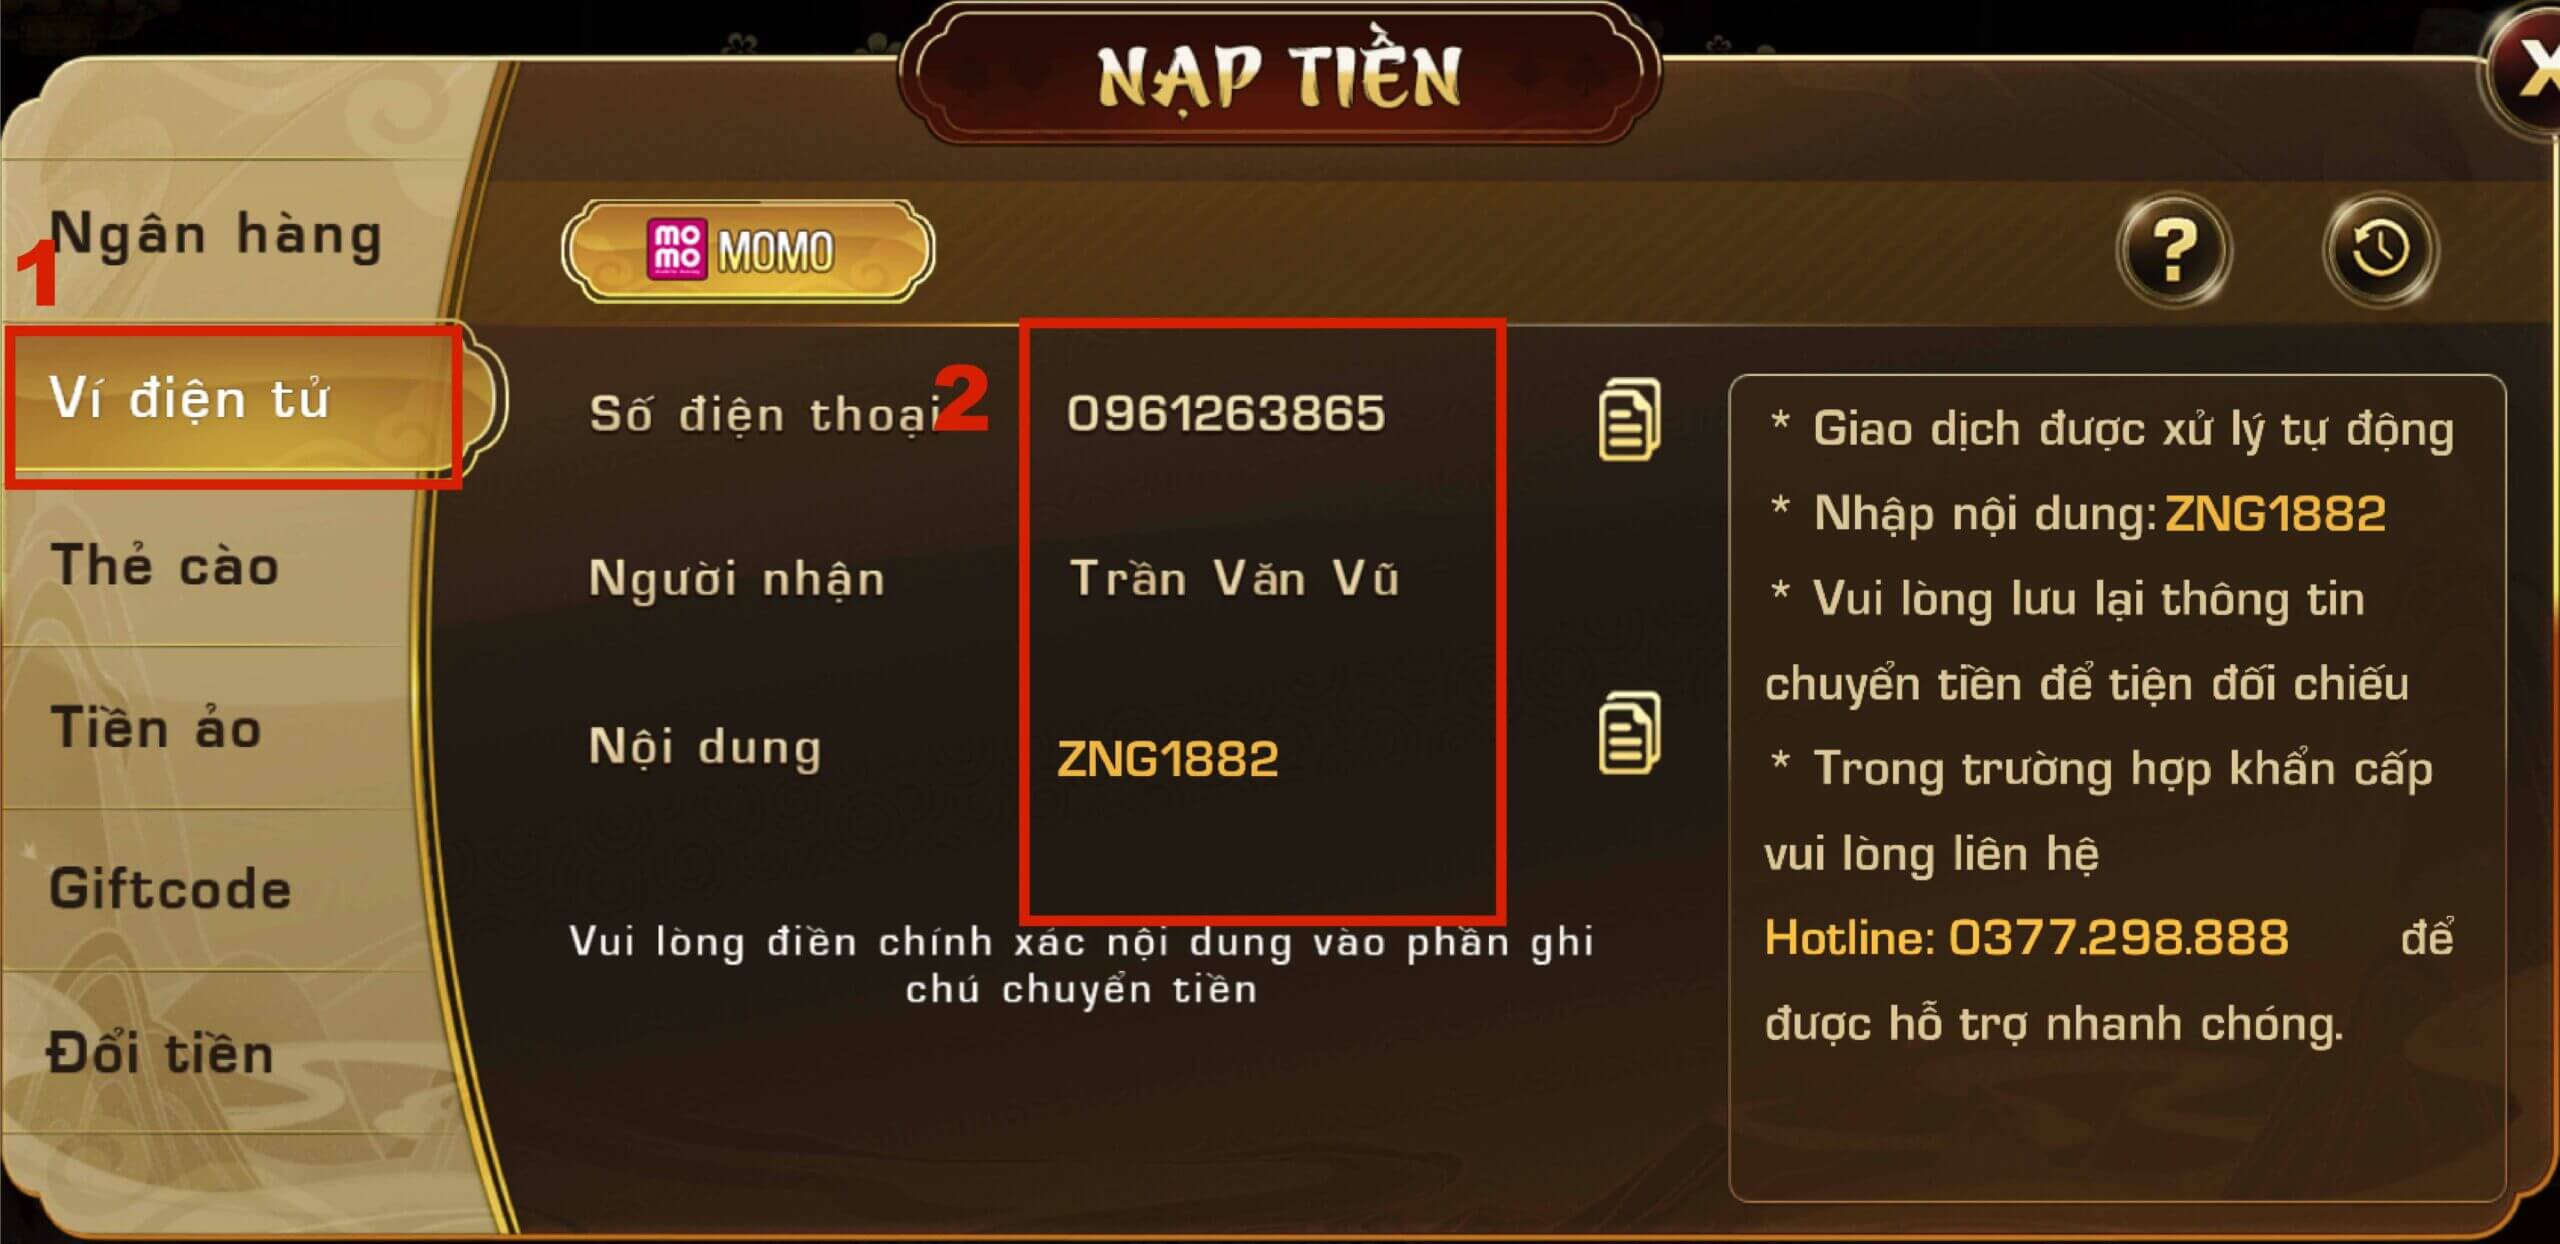 iWin 2023 - Link tải game iWin Club - iPhone, Android, APK, PC